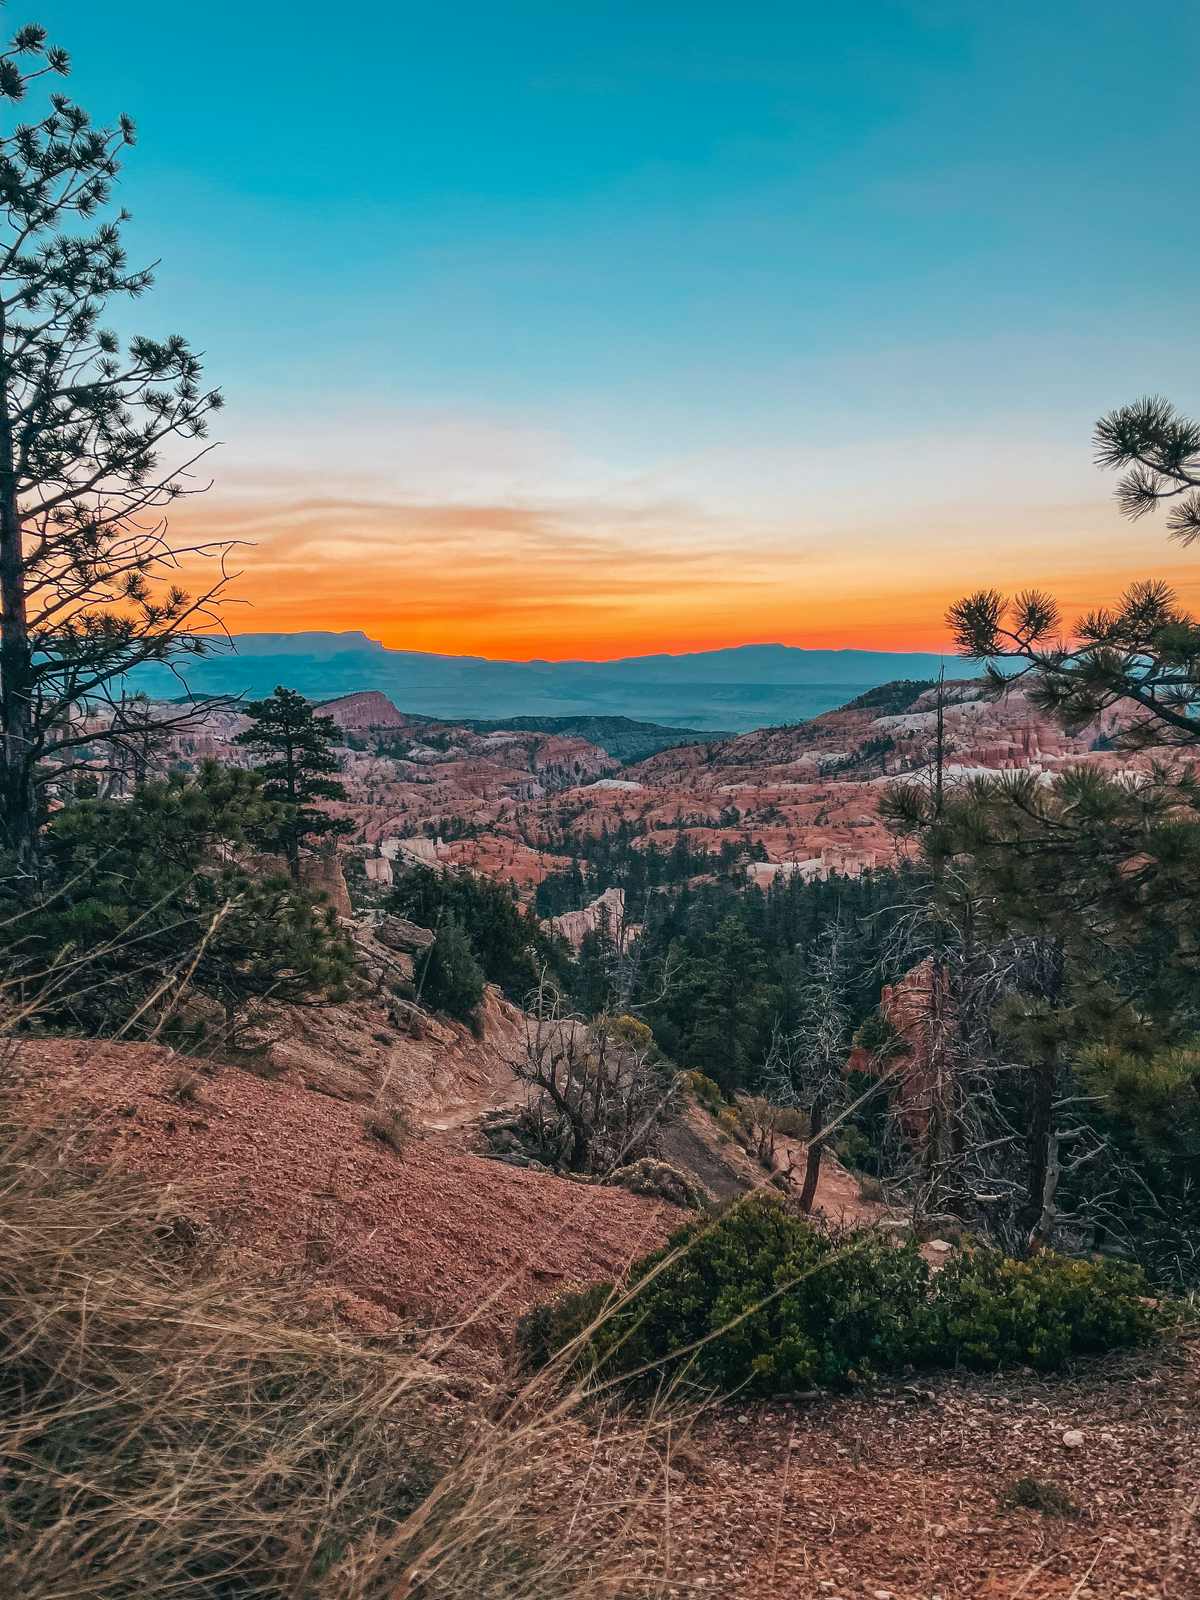 Sunrise at Sunrise Point in Bryce Canyon